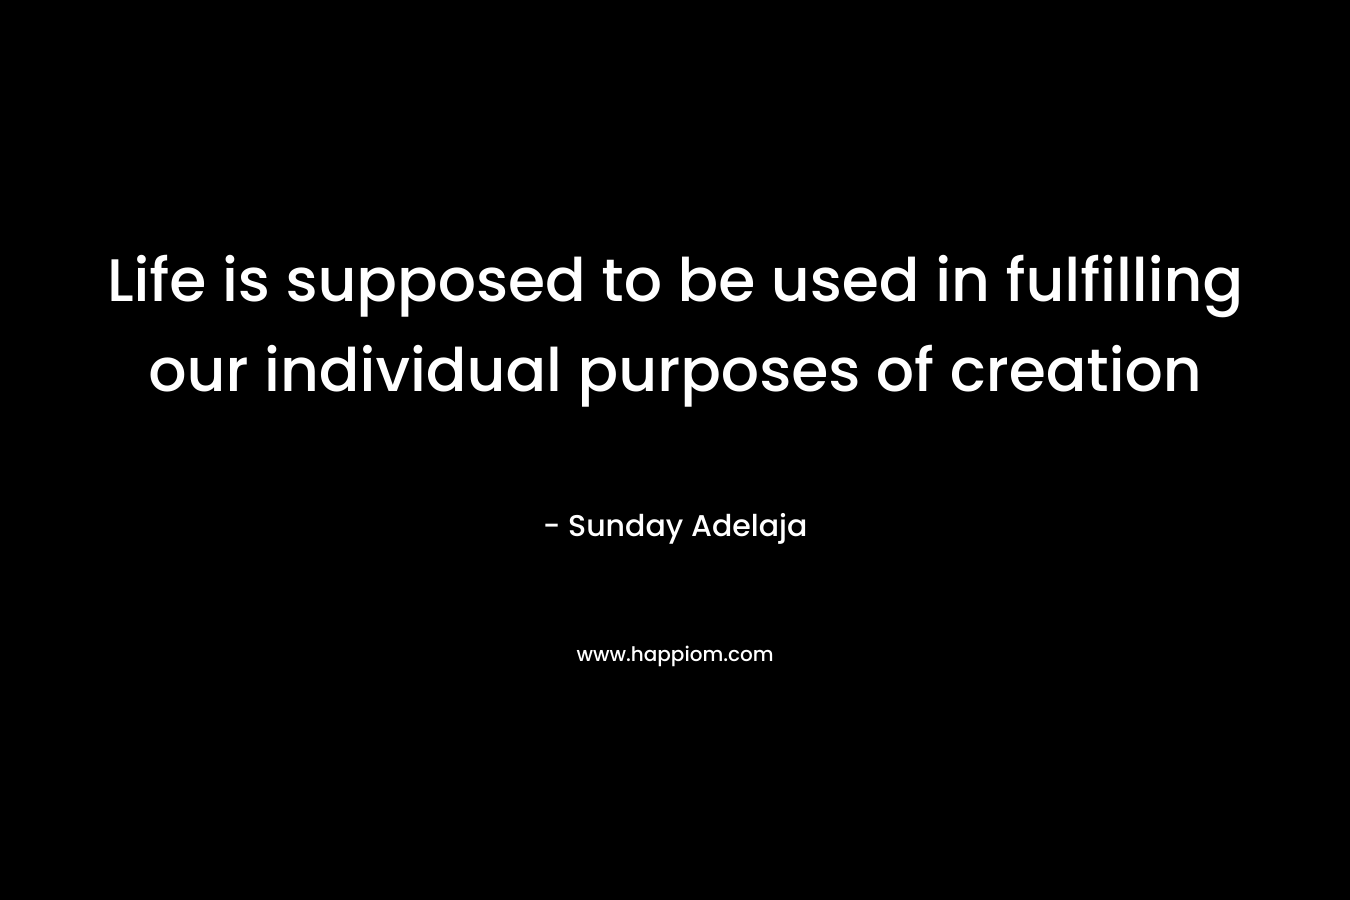 Life is supposed to be used in fulfilling our individual purposes of creation